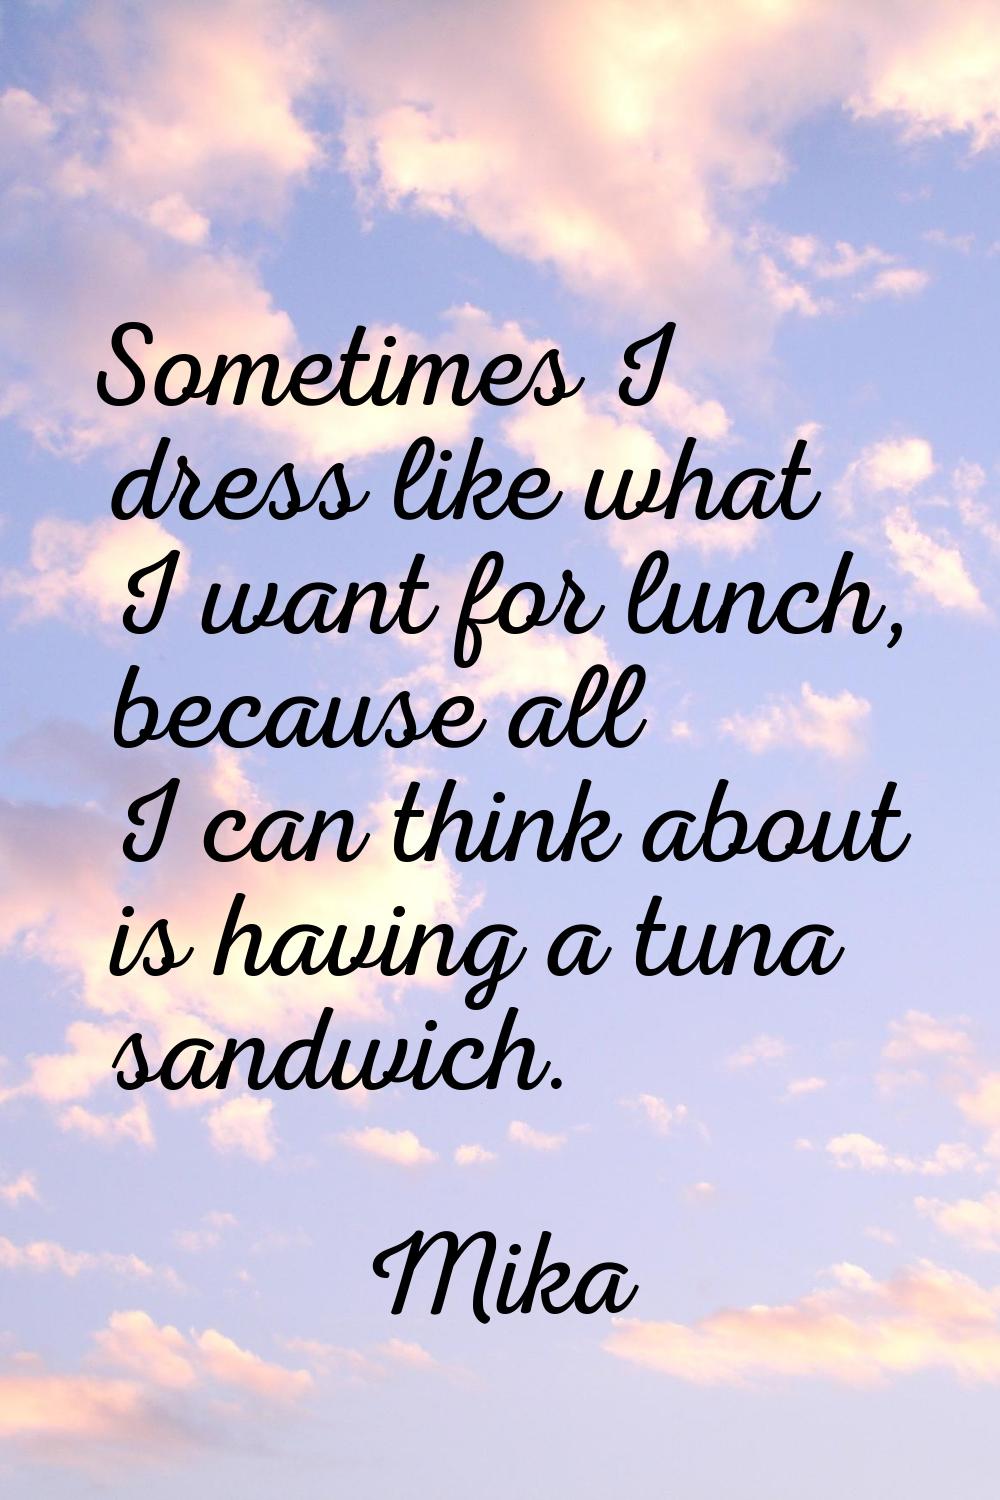 Sometimes I dress like what I want for lunch, because all I can think about is having a tuna sandwi